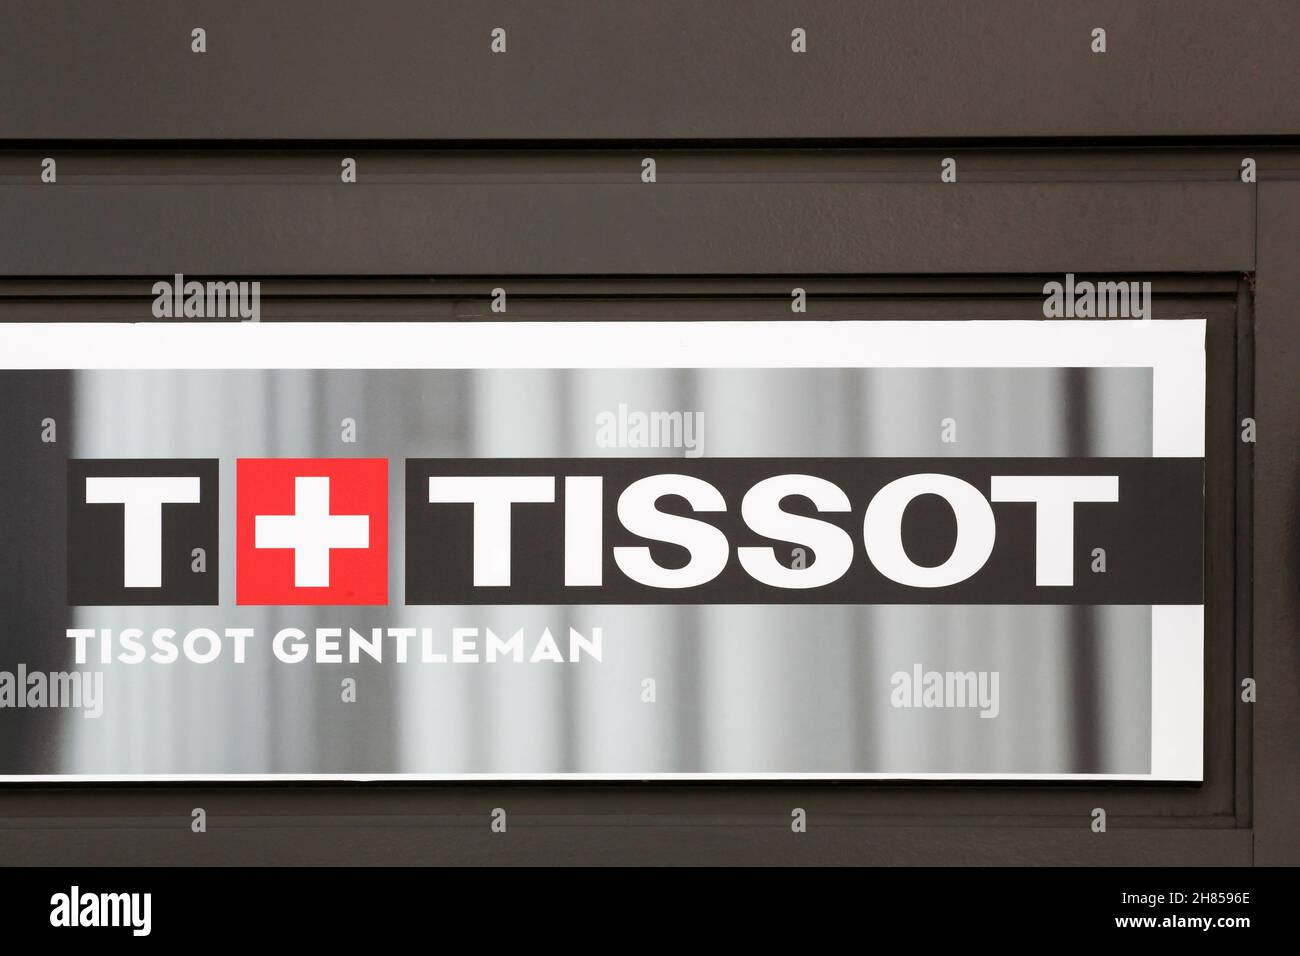 Villefranche, France - May 15, 2020: Tissot logo on a wall. Tissot is a Swiss watchmaker and the company was founded in Le Locle, Switzerland Stock Photo